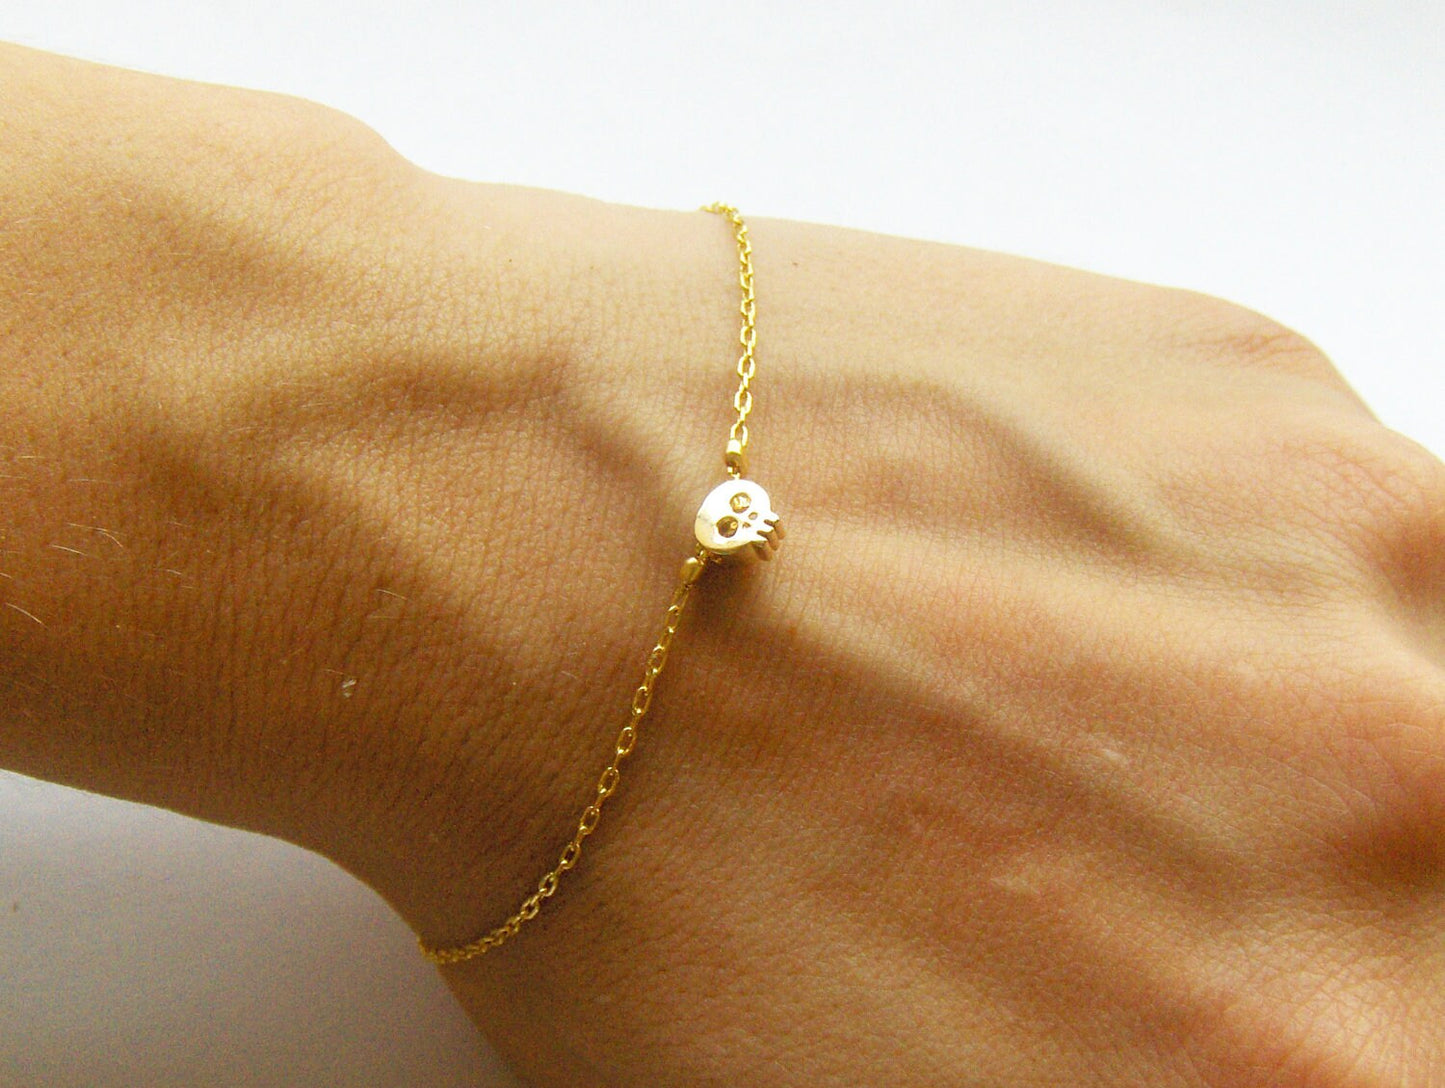 Mini Skull Bracelet in Gold - 16K gold plated chain and charm